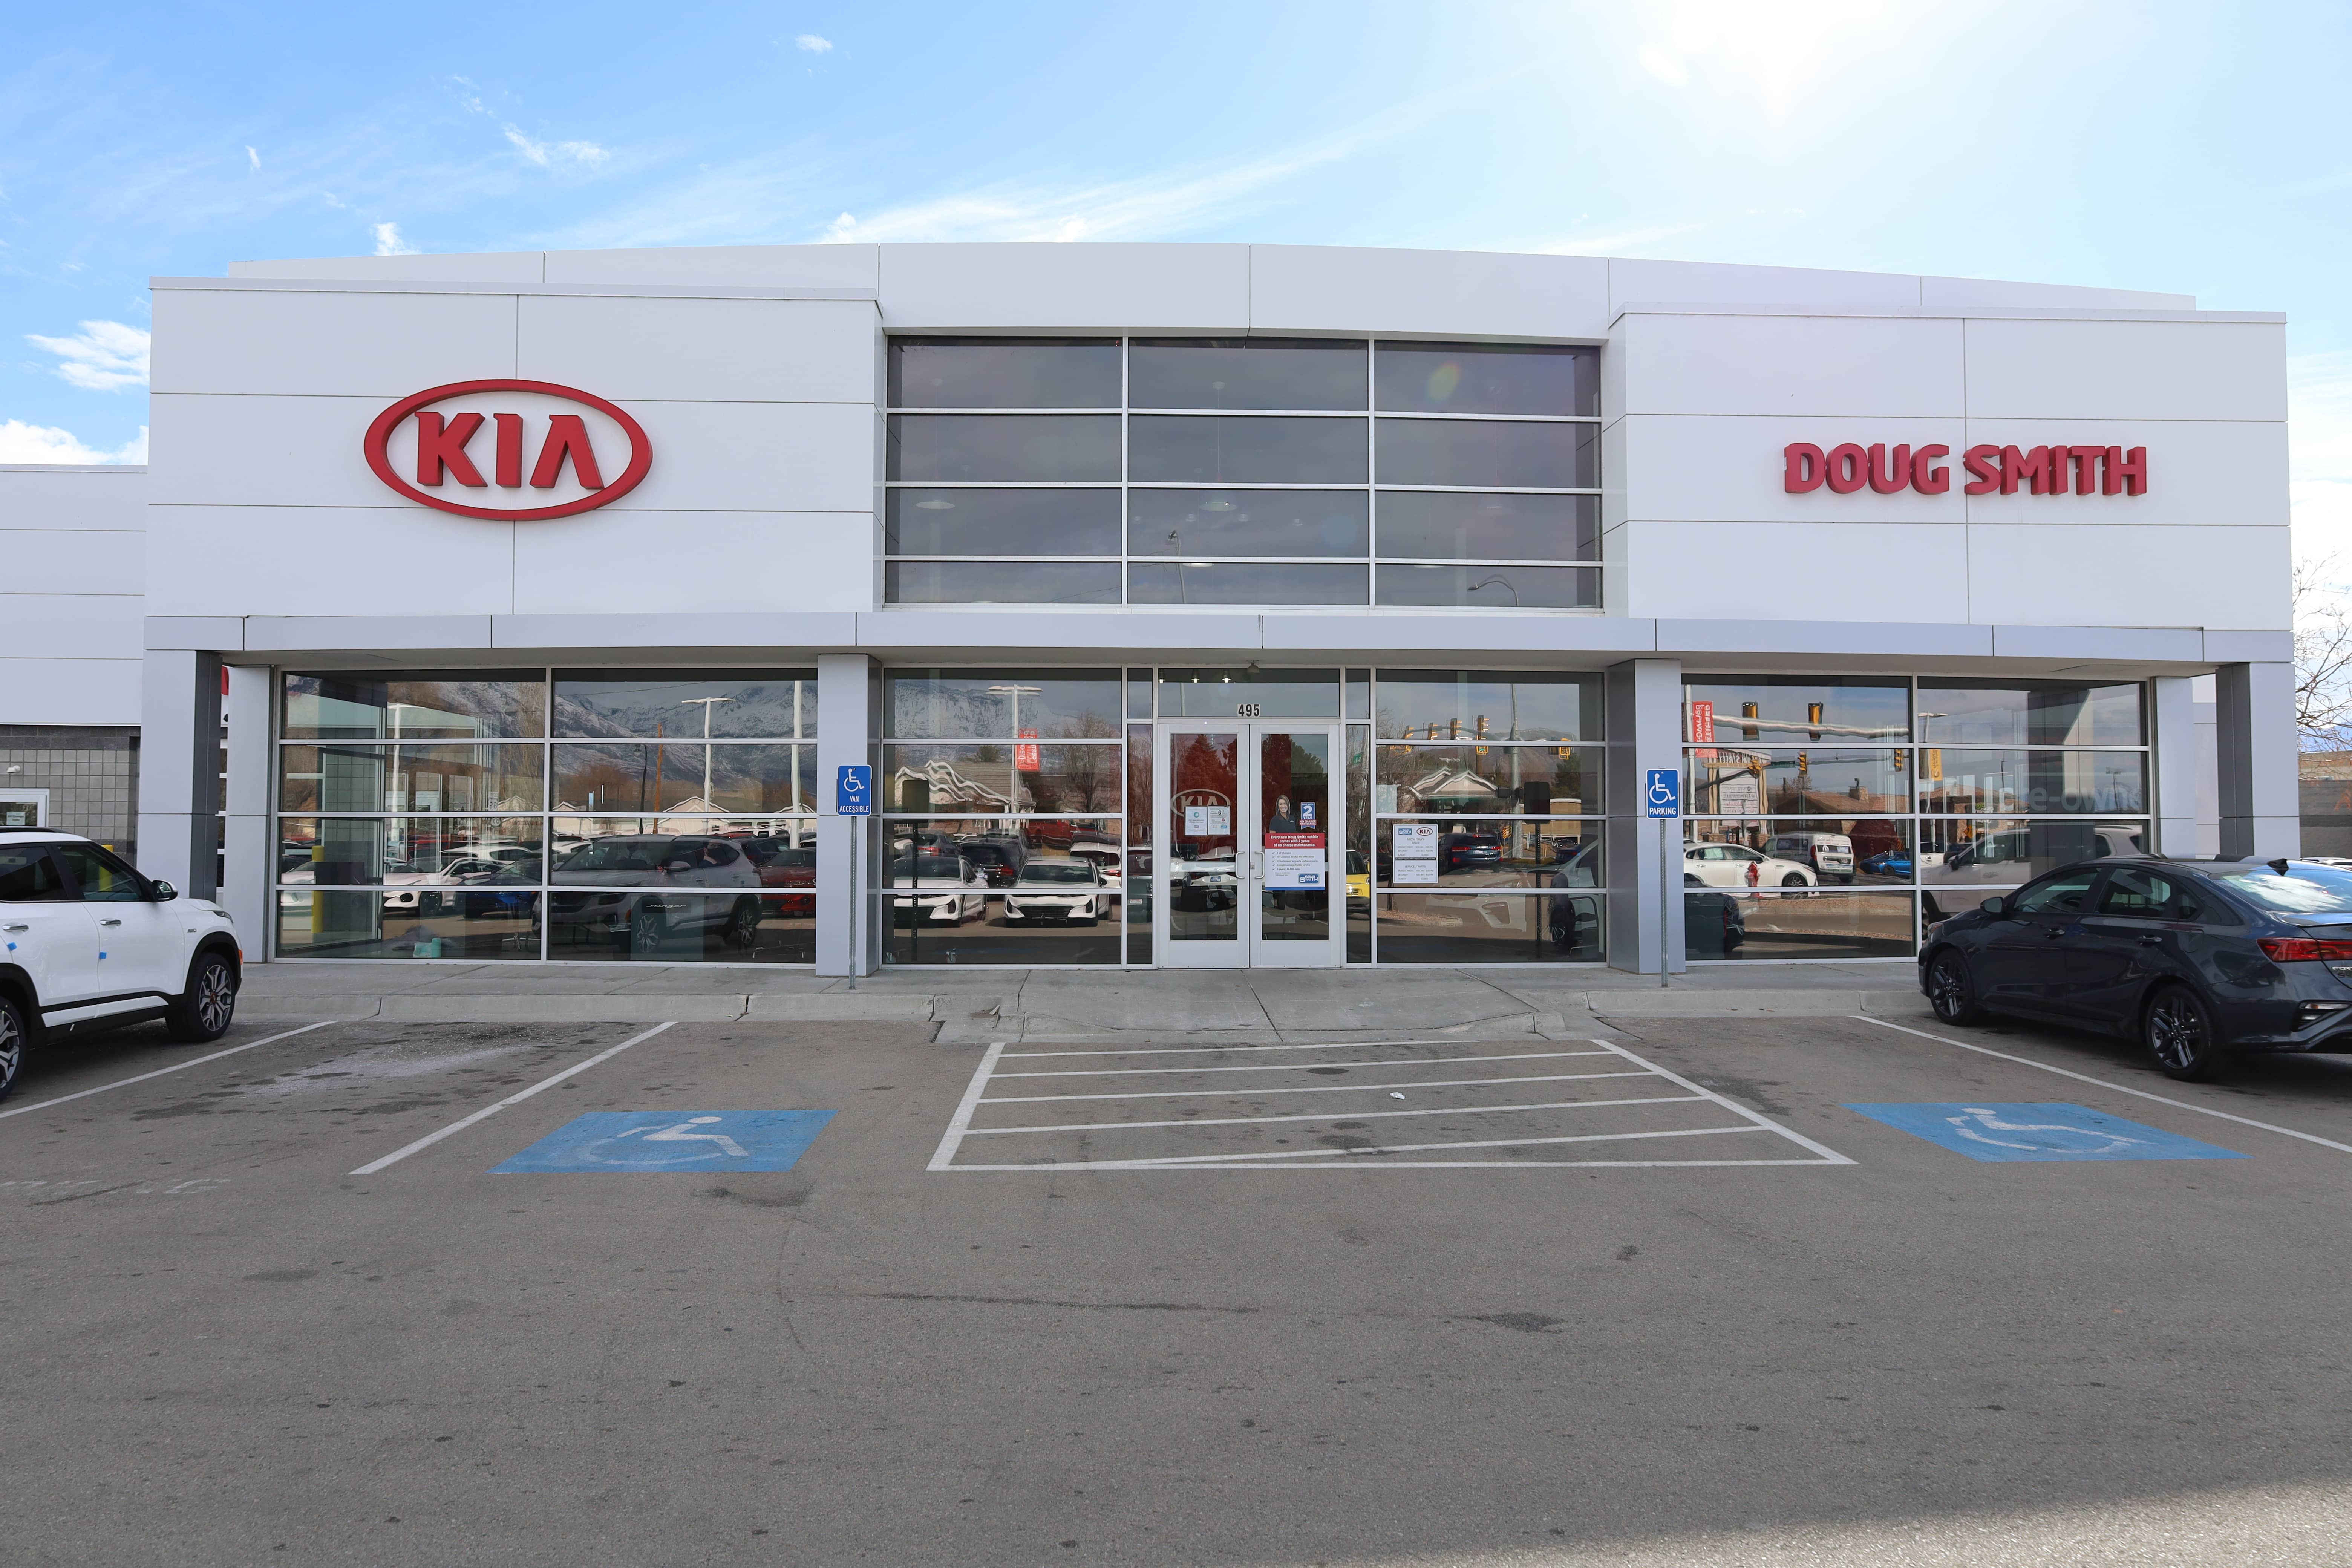 Doug Smith Kia is conveniently located off the Main St exit in American Fork, UT. Come down and check out all of our latest Kia Models.